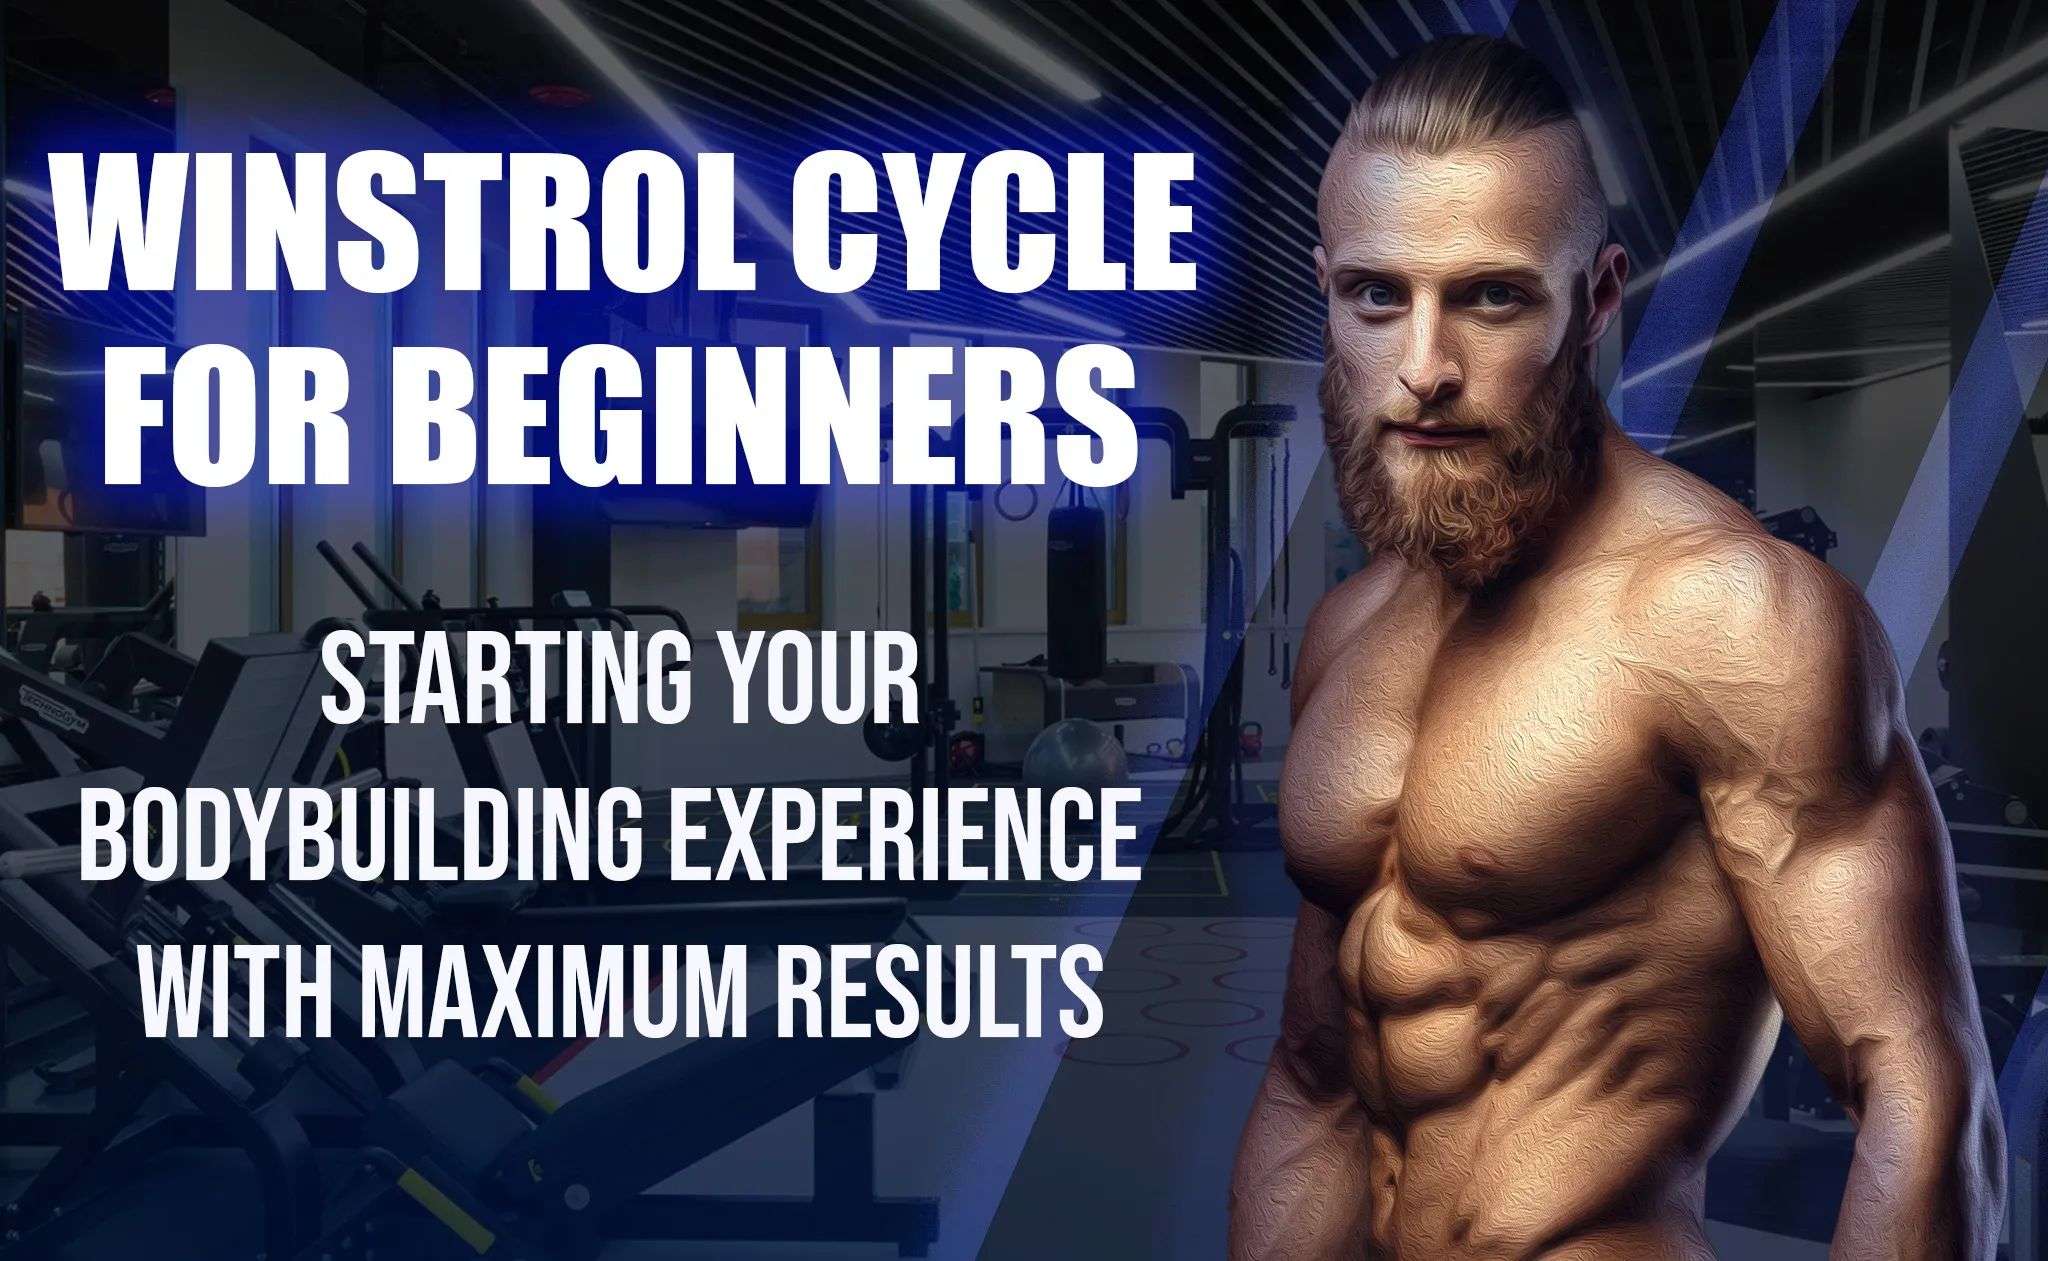 Winstrol Cycle for Beginners – Starting Your Bodybuilding Experience with Maximum Results